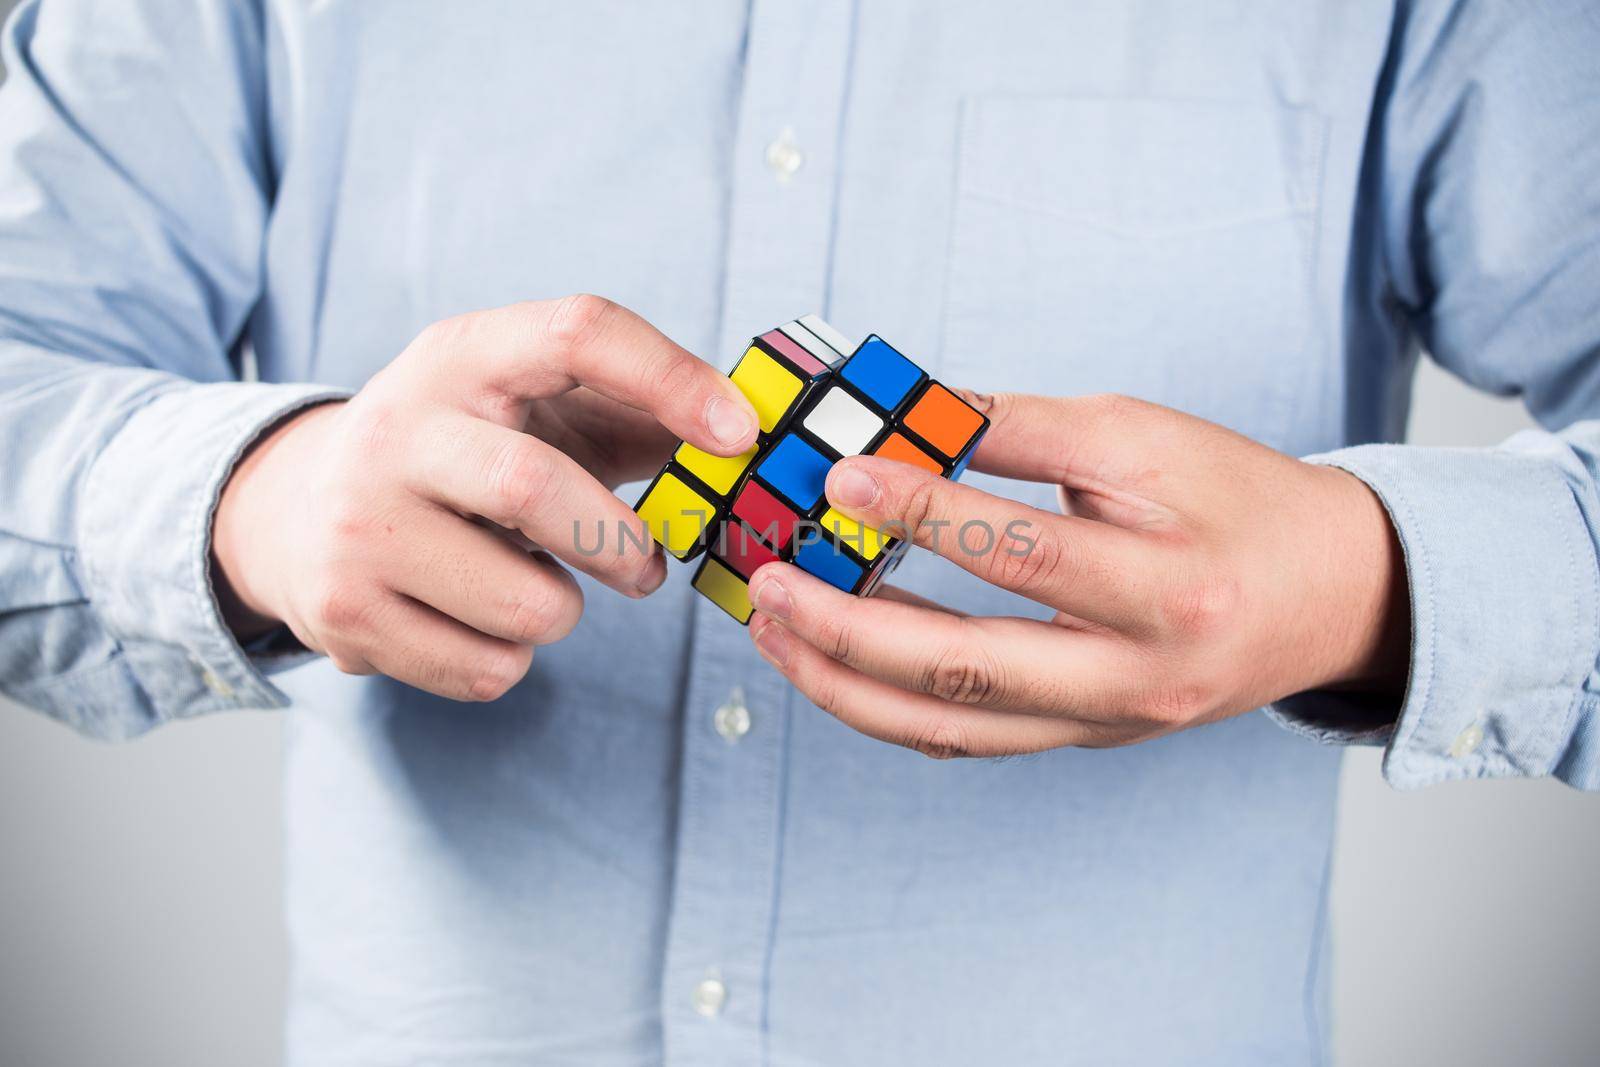 man play a rubik's cube at home by whatwolf